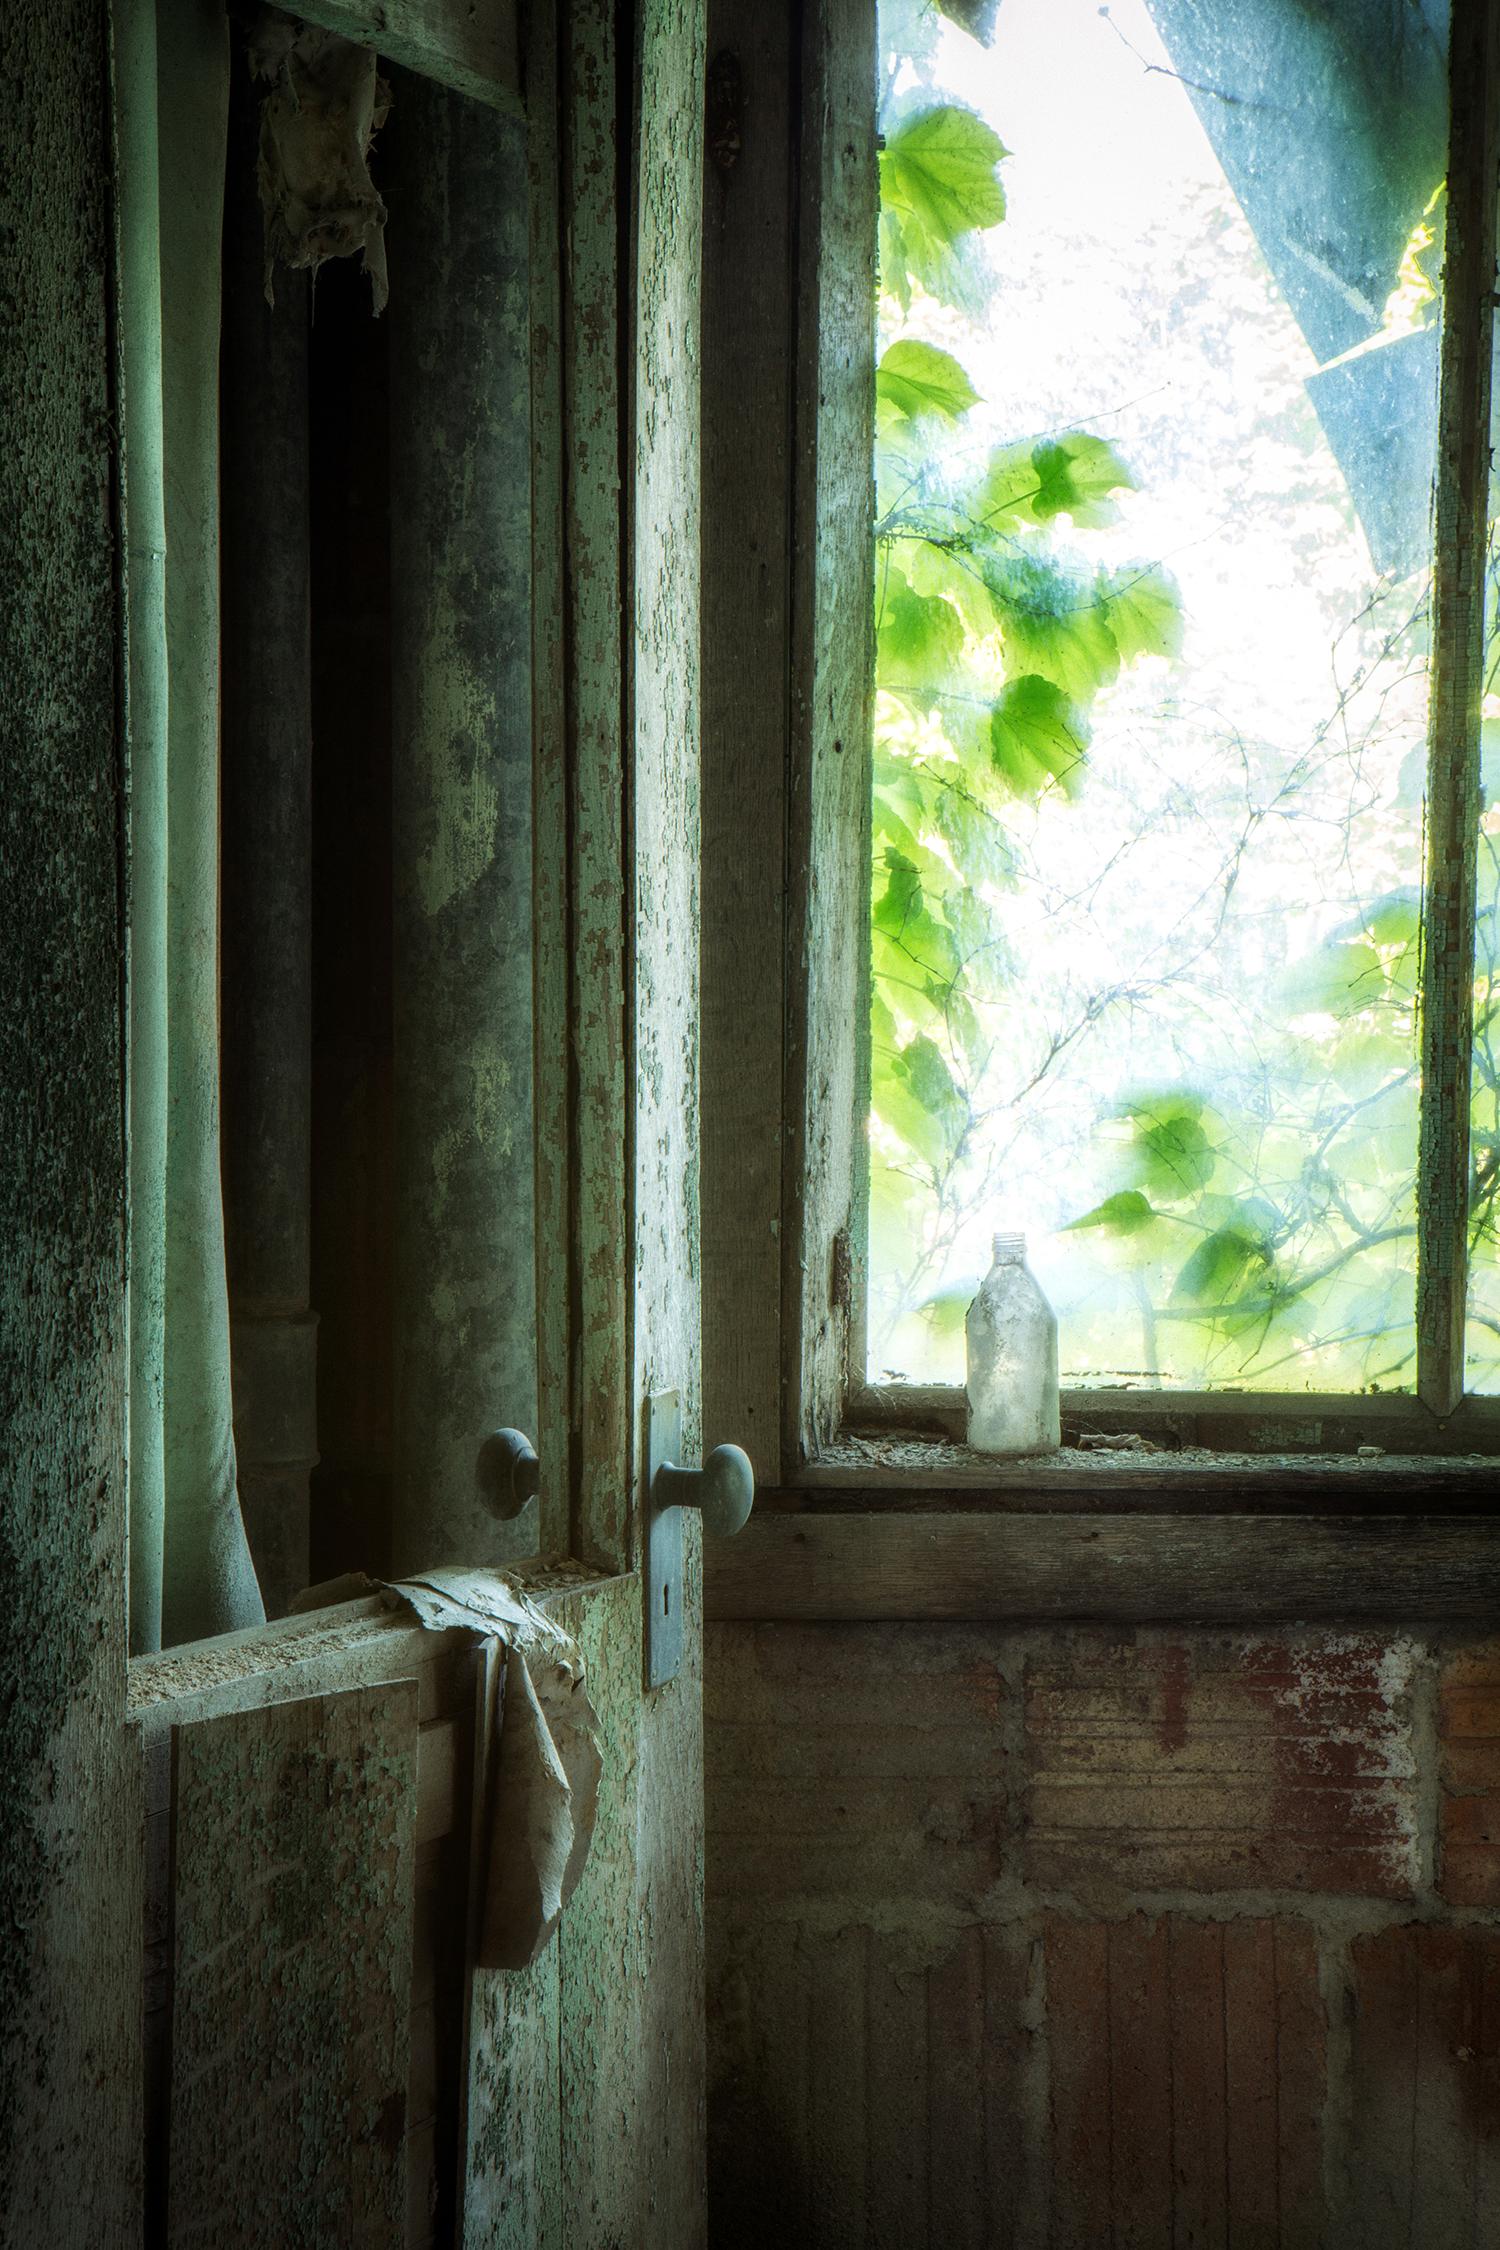 "Remnants", contemporary, abandoned, window, door, blue, green, color photograph